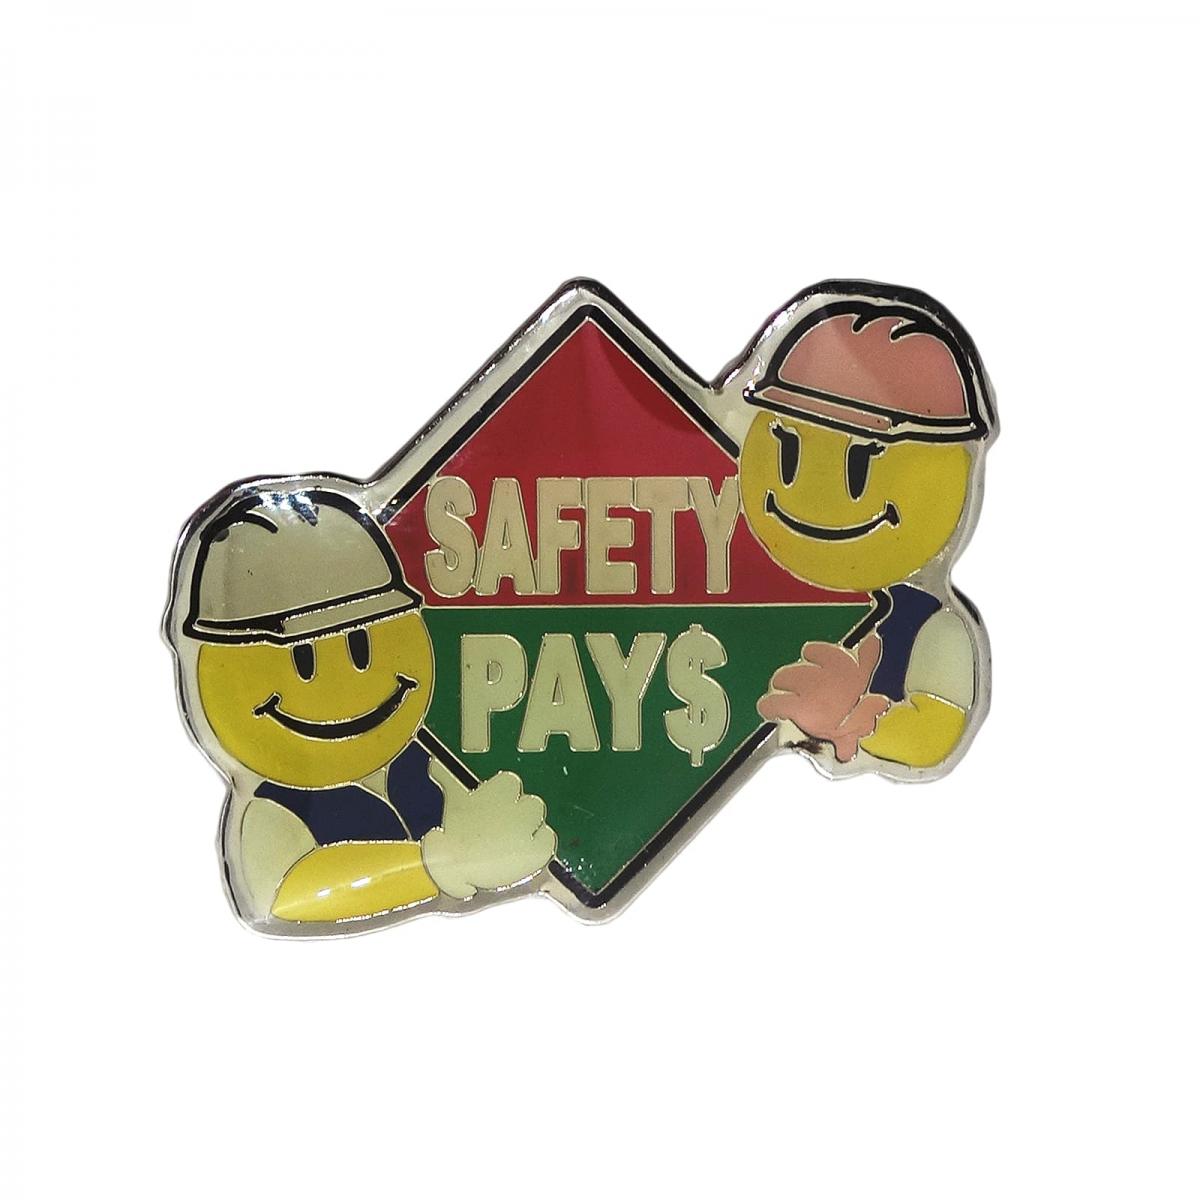 SAFETY PAY$ ピンズ 留め具付き　 Walmart